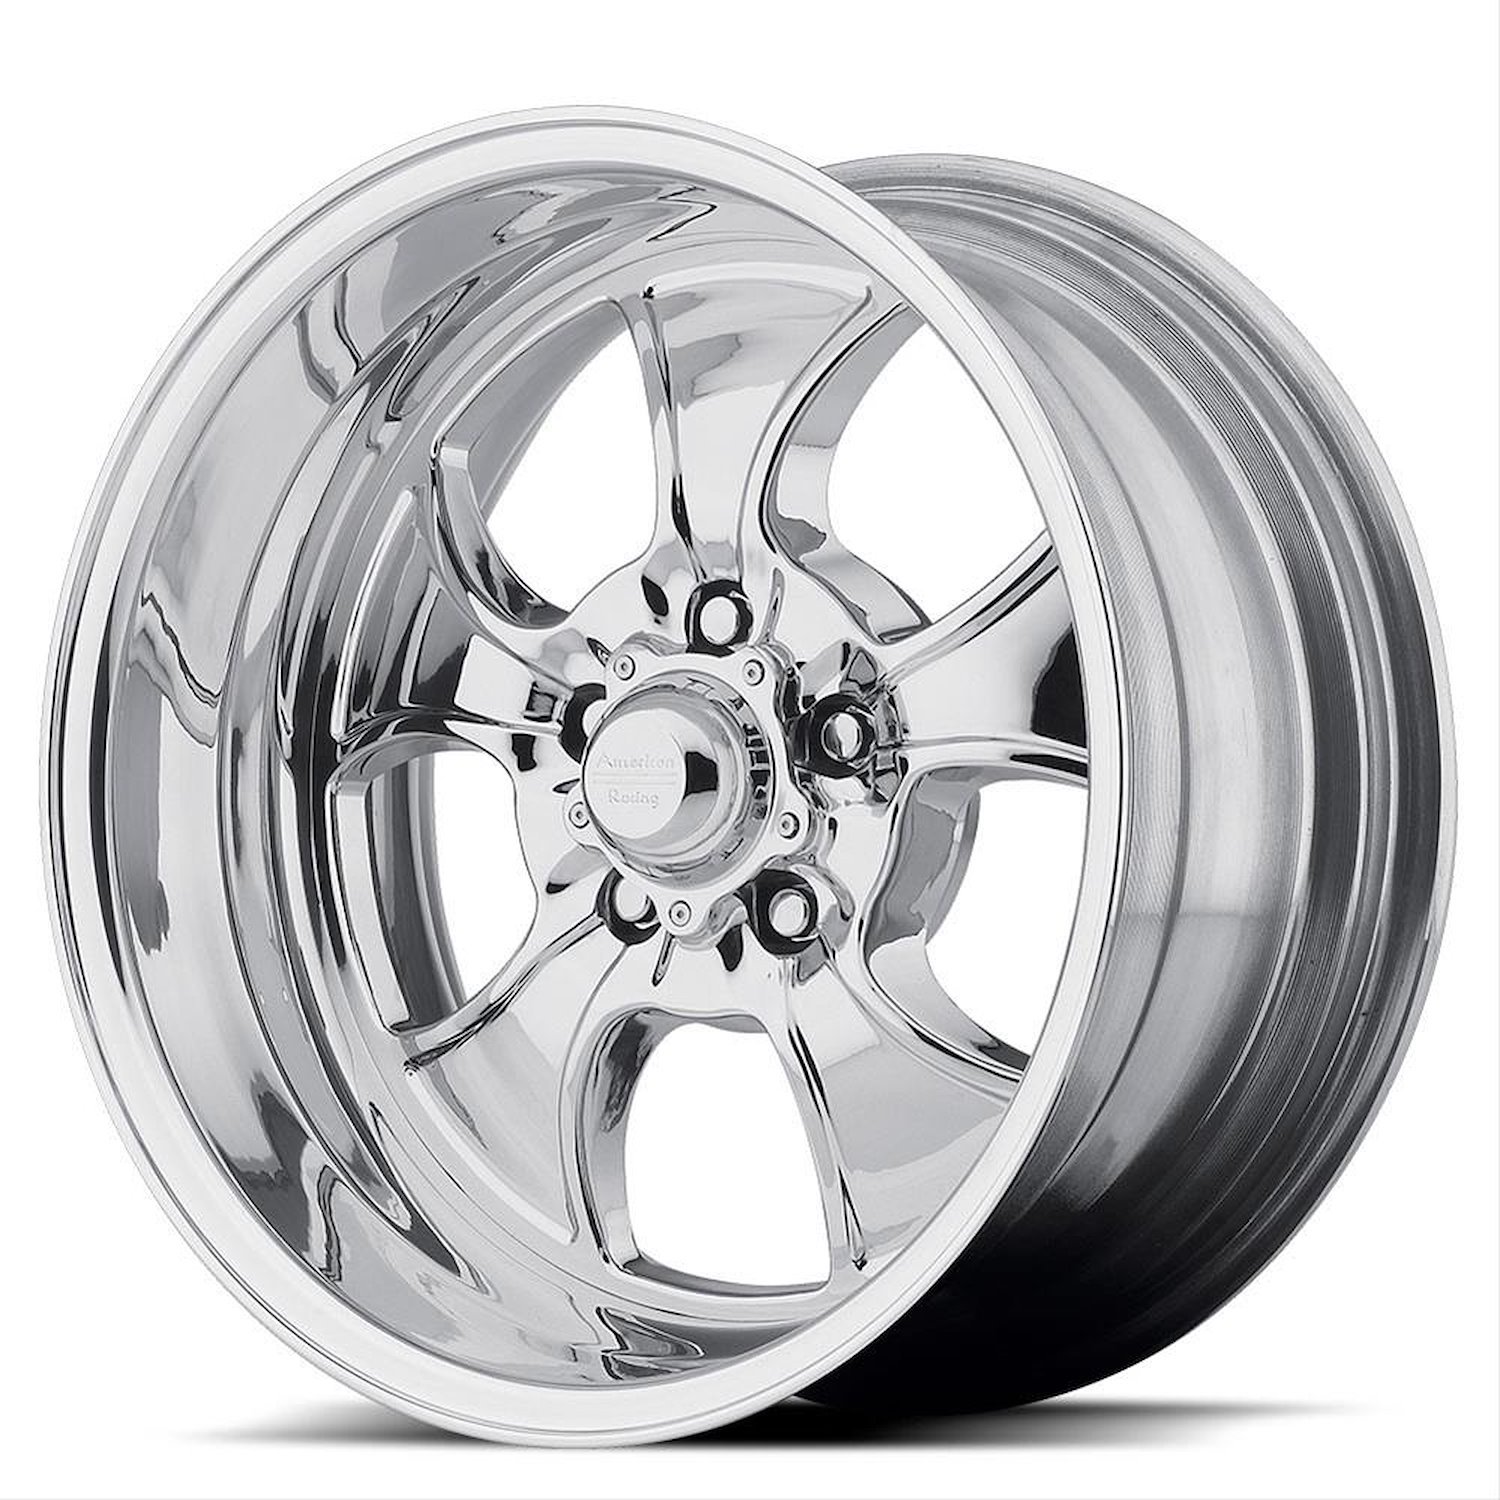 AMERICAN RACING HOPSTER TWO-PIECE POLISHED 17 x 9.5 5x4.5 6 5.49